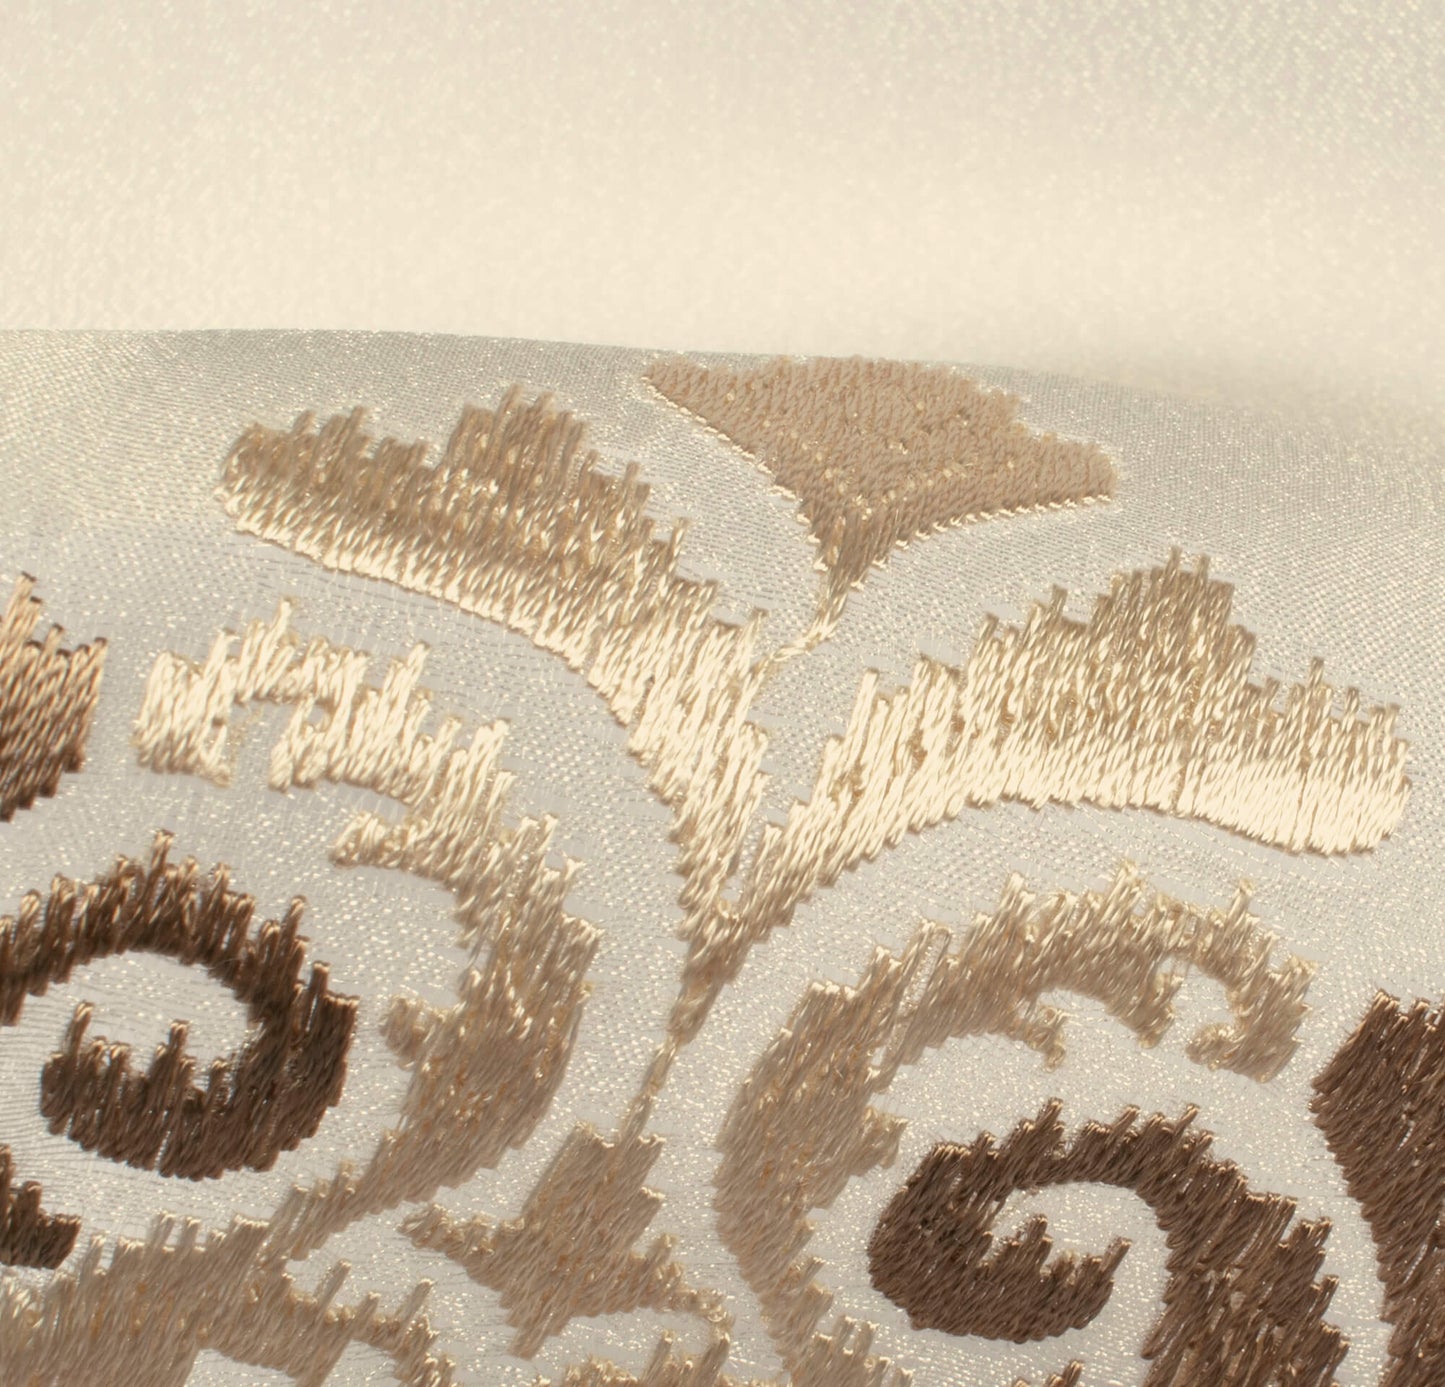 Oatmeal Beige And Tan Brown Ethnic Pattern Embroidery Organza Tissue Premium Sheer Fabric (Width 48 Inches)